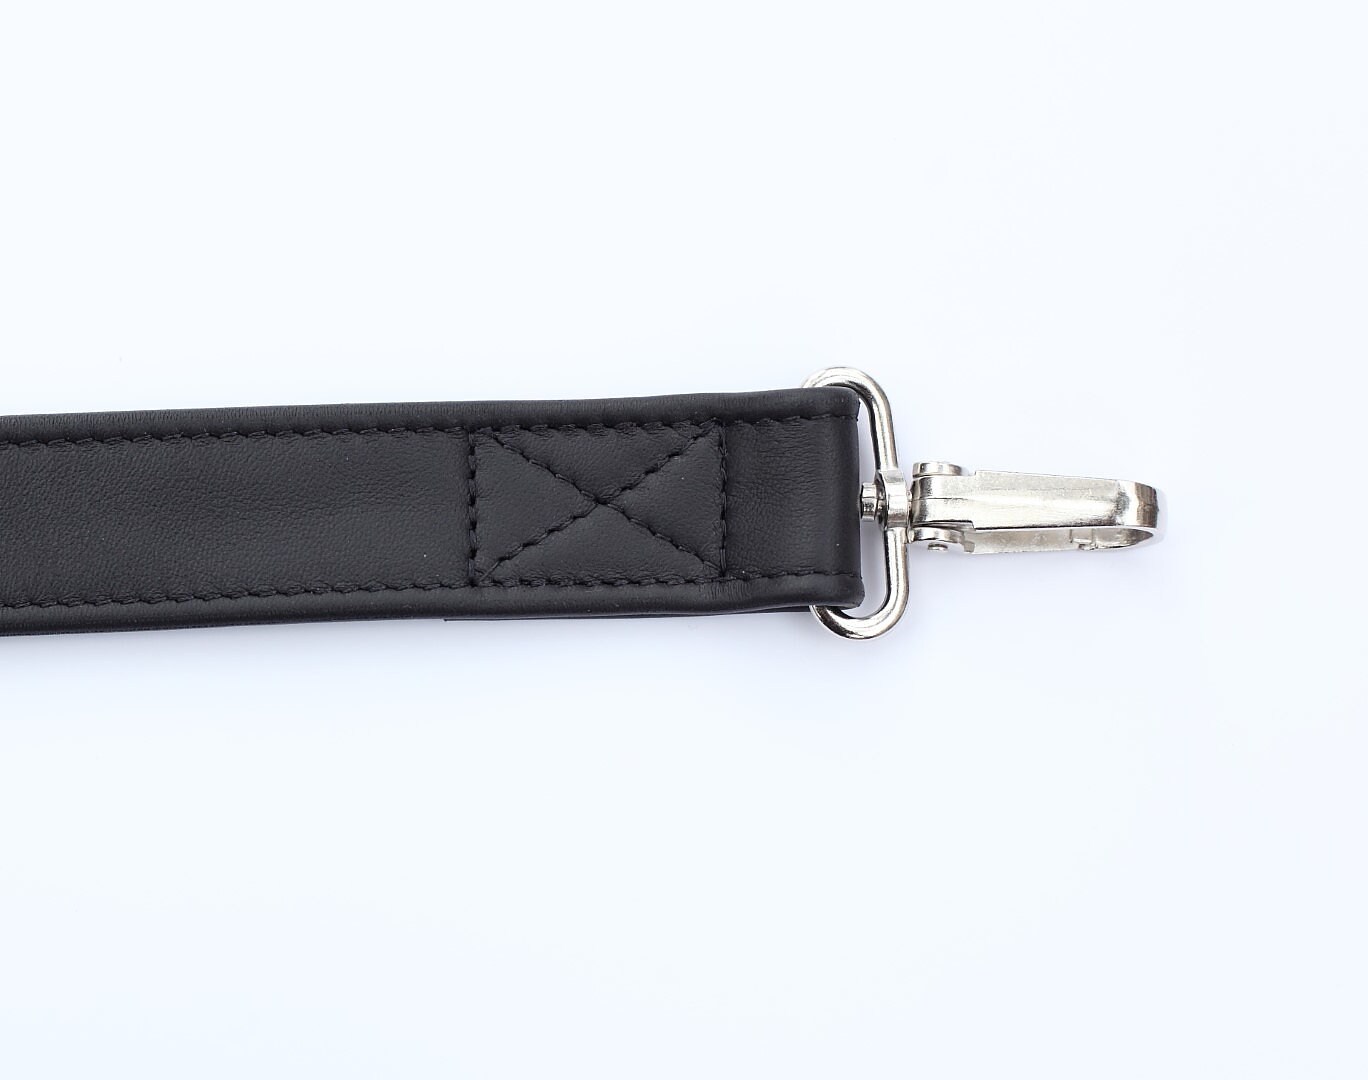 2cm Black Leather Strap at 80 or 110 Cm/leather Handles,purse